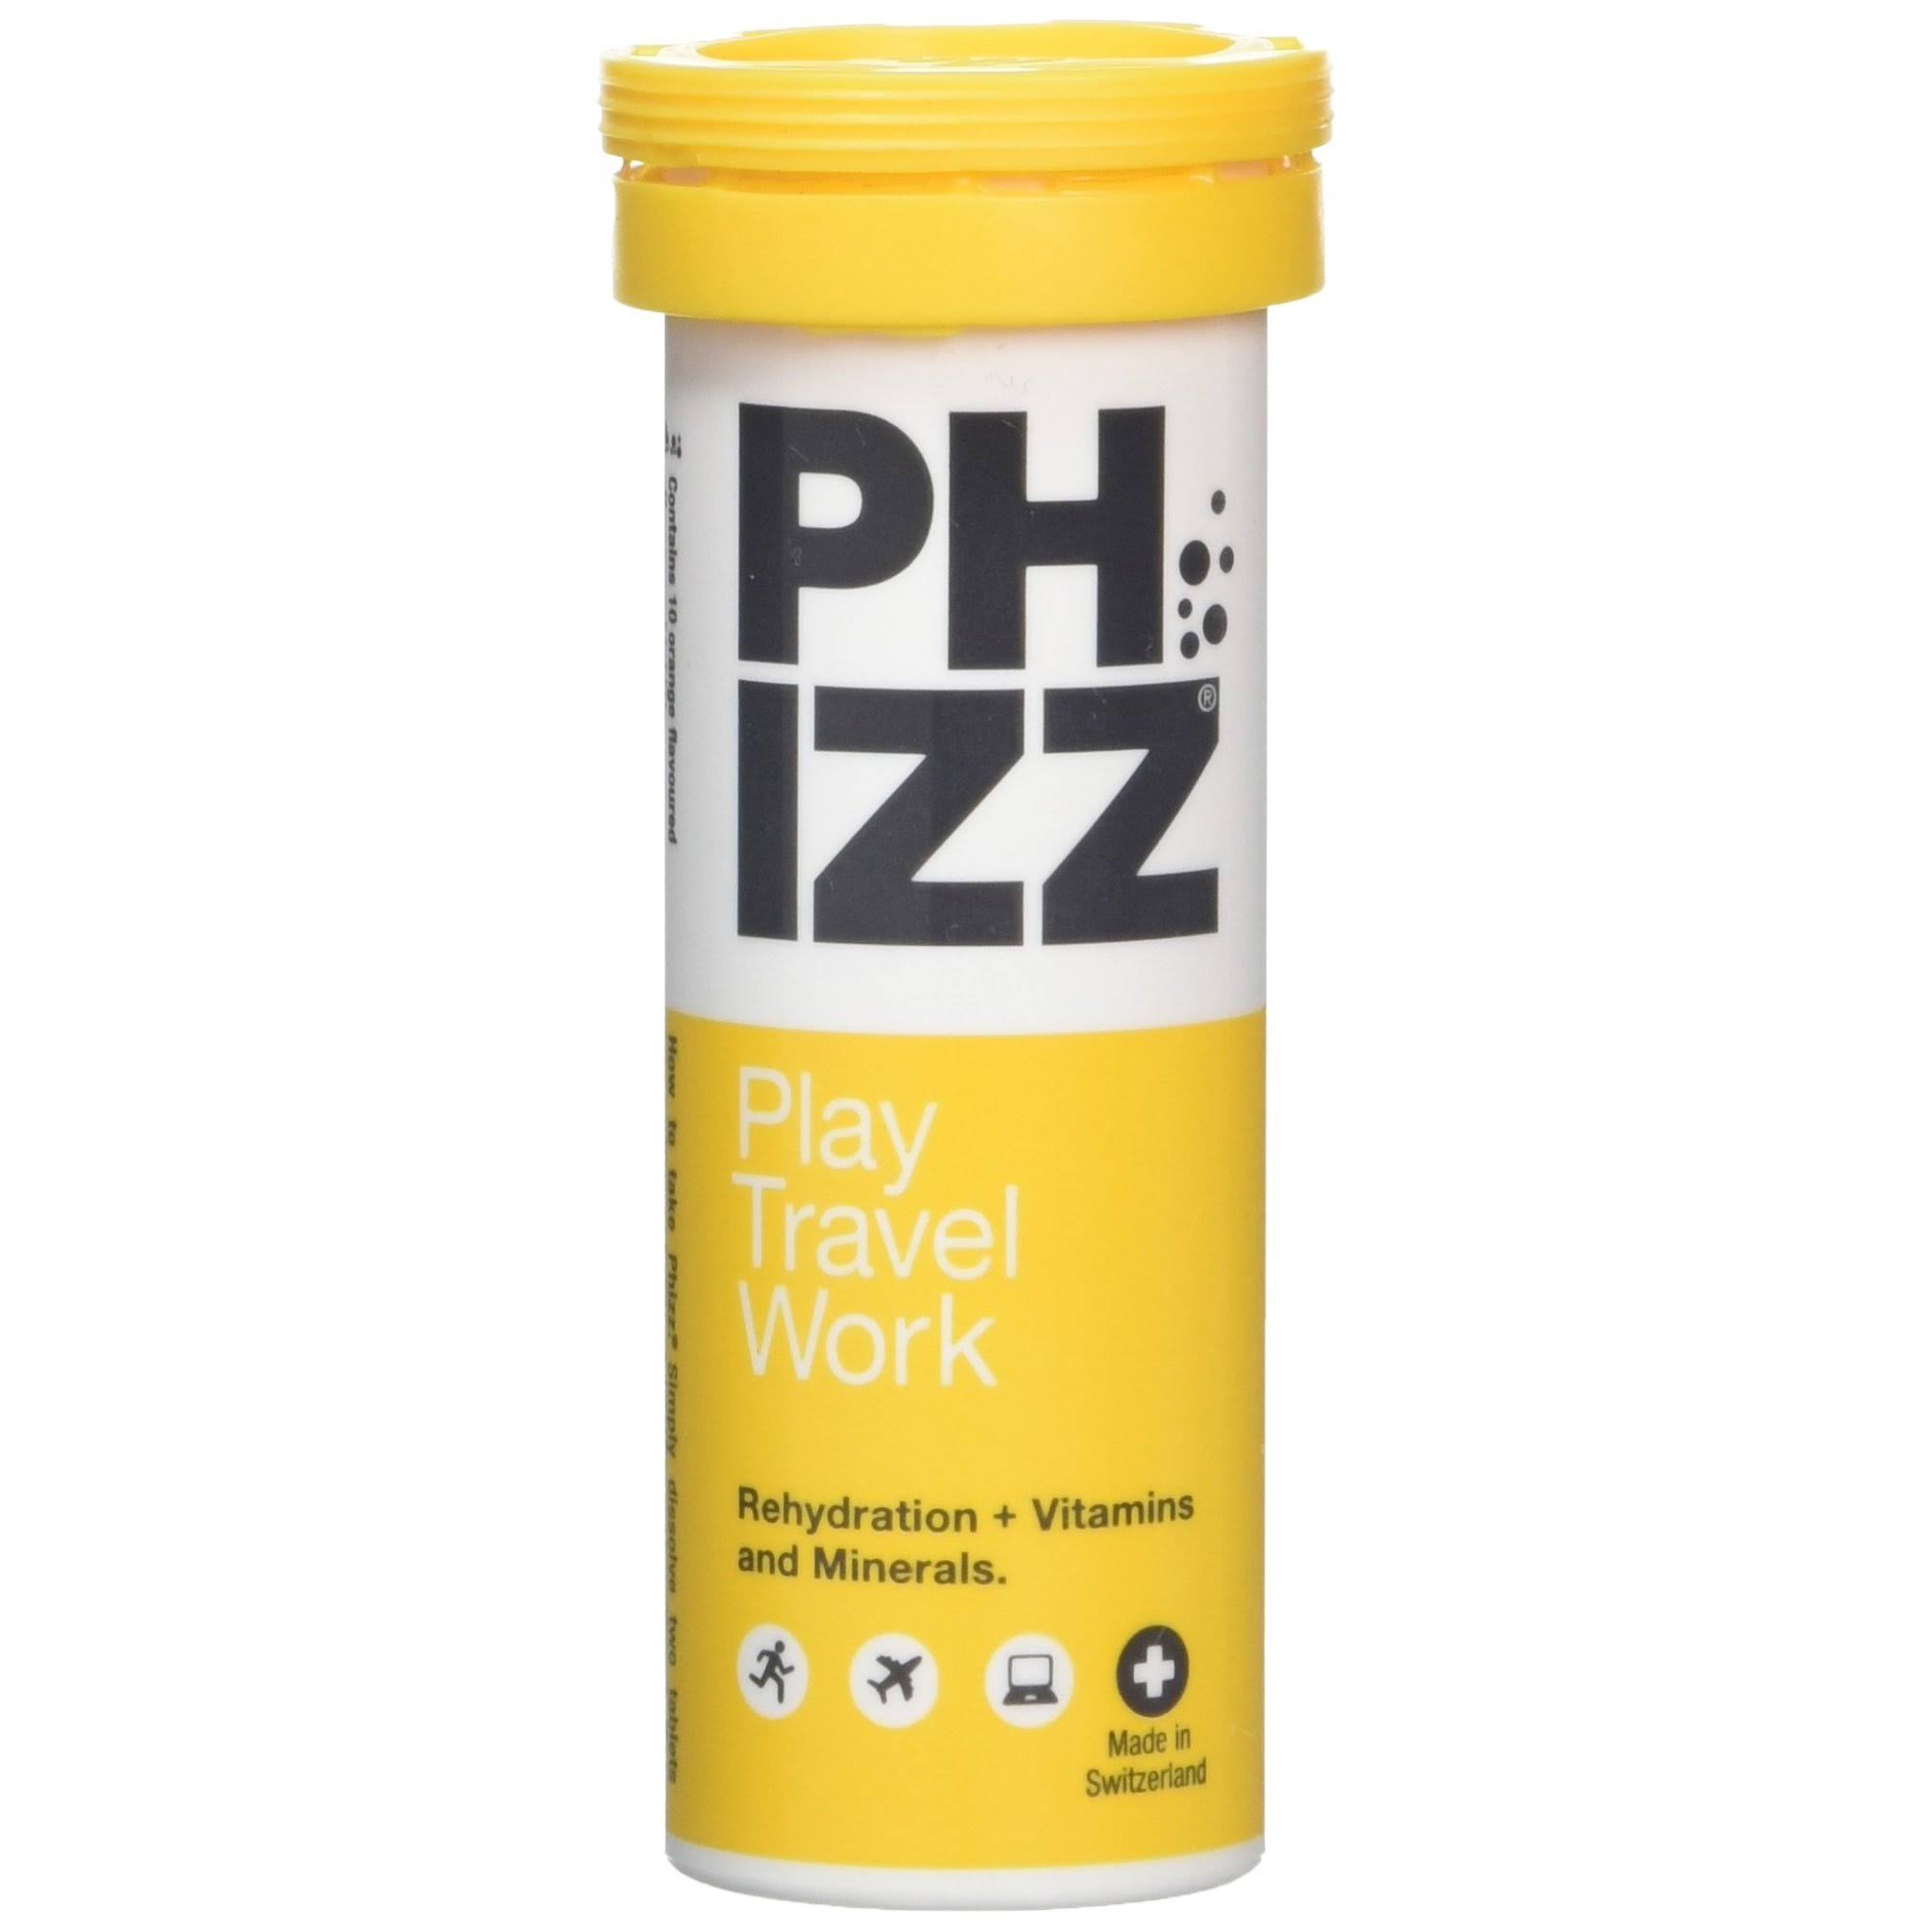 Phizz Hydration Vitamins and Minerals Effervescent Tablets - Orange, 10ct